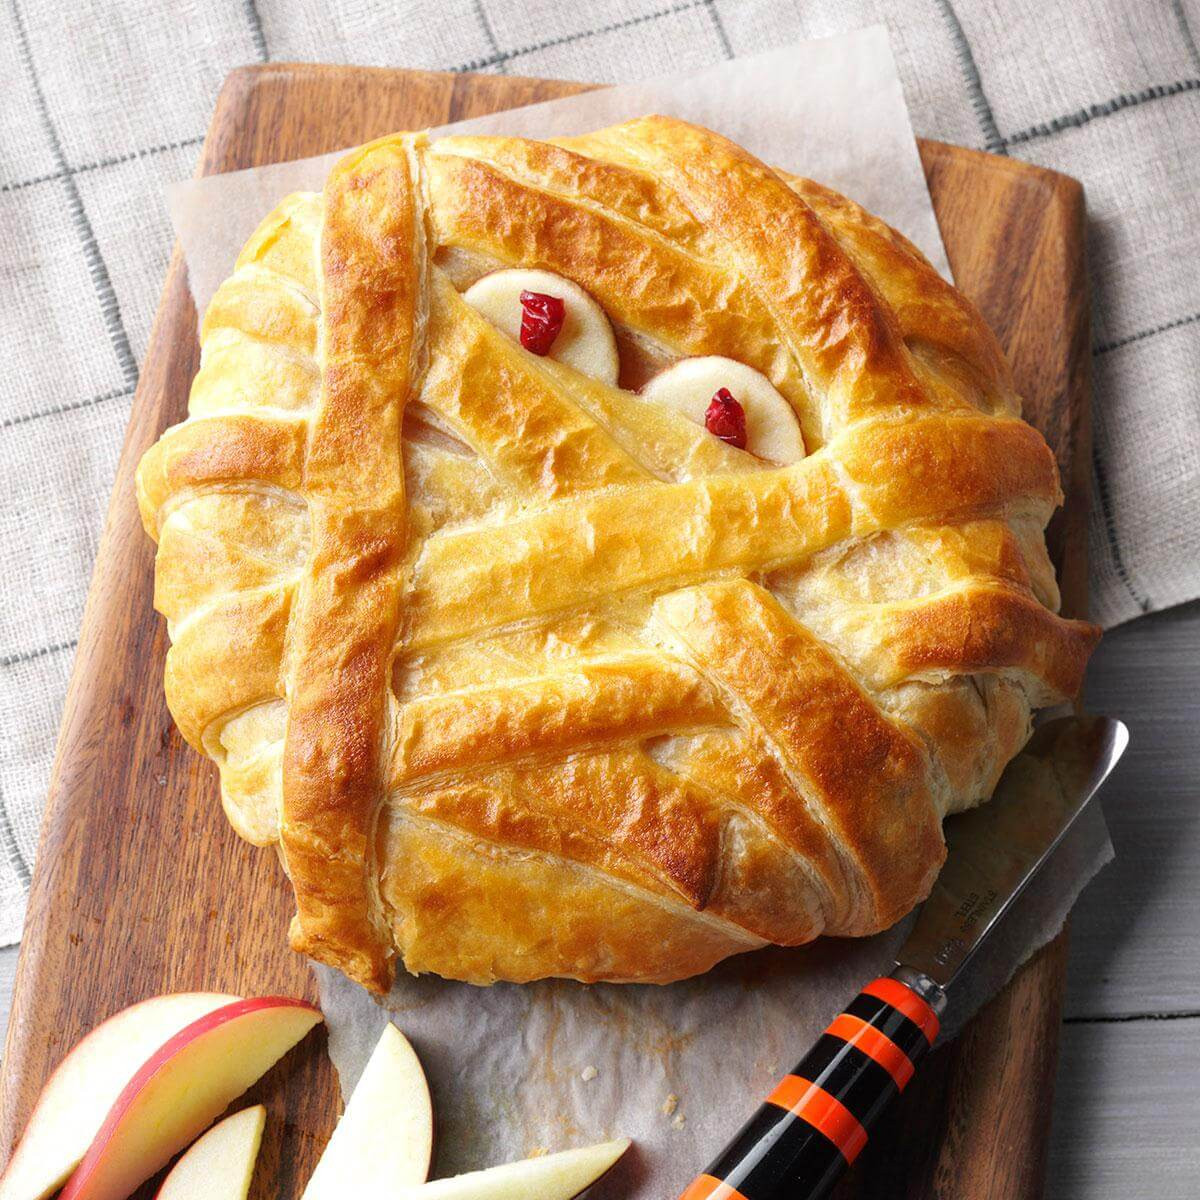 Halloween Main Dishes For Potluck
 Mummy Wrapped Brie Recipe